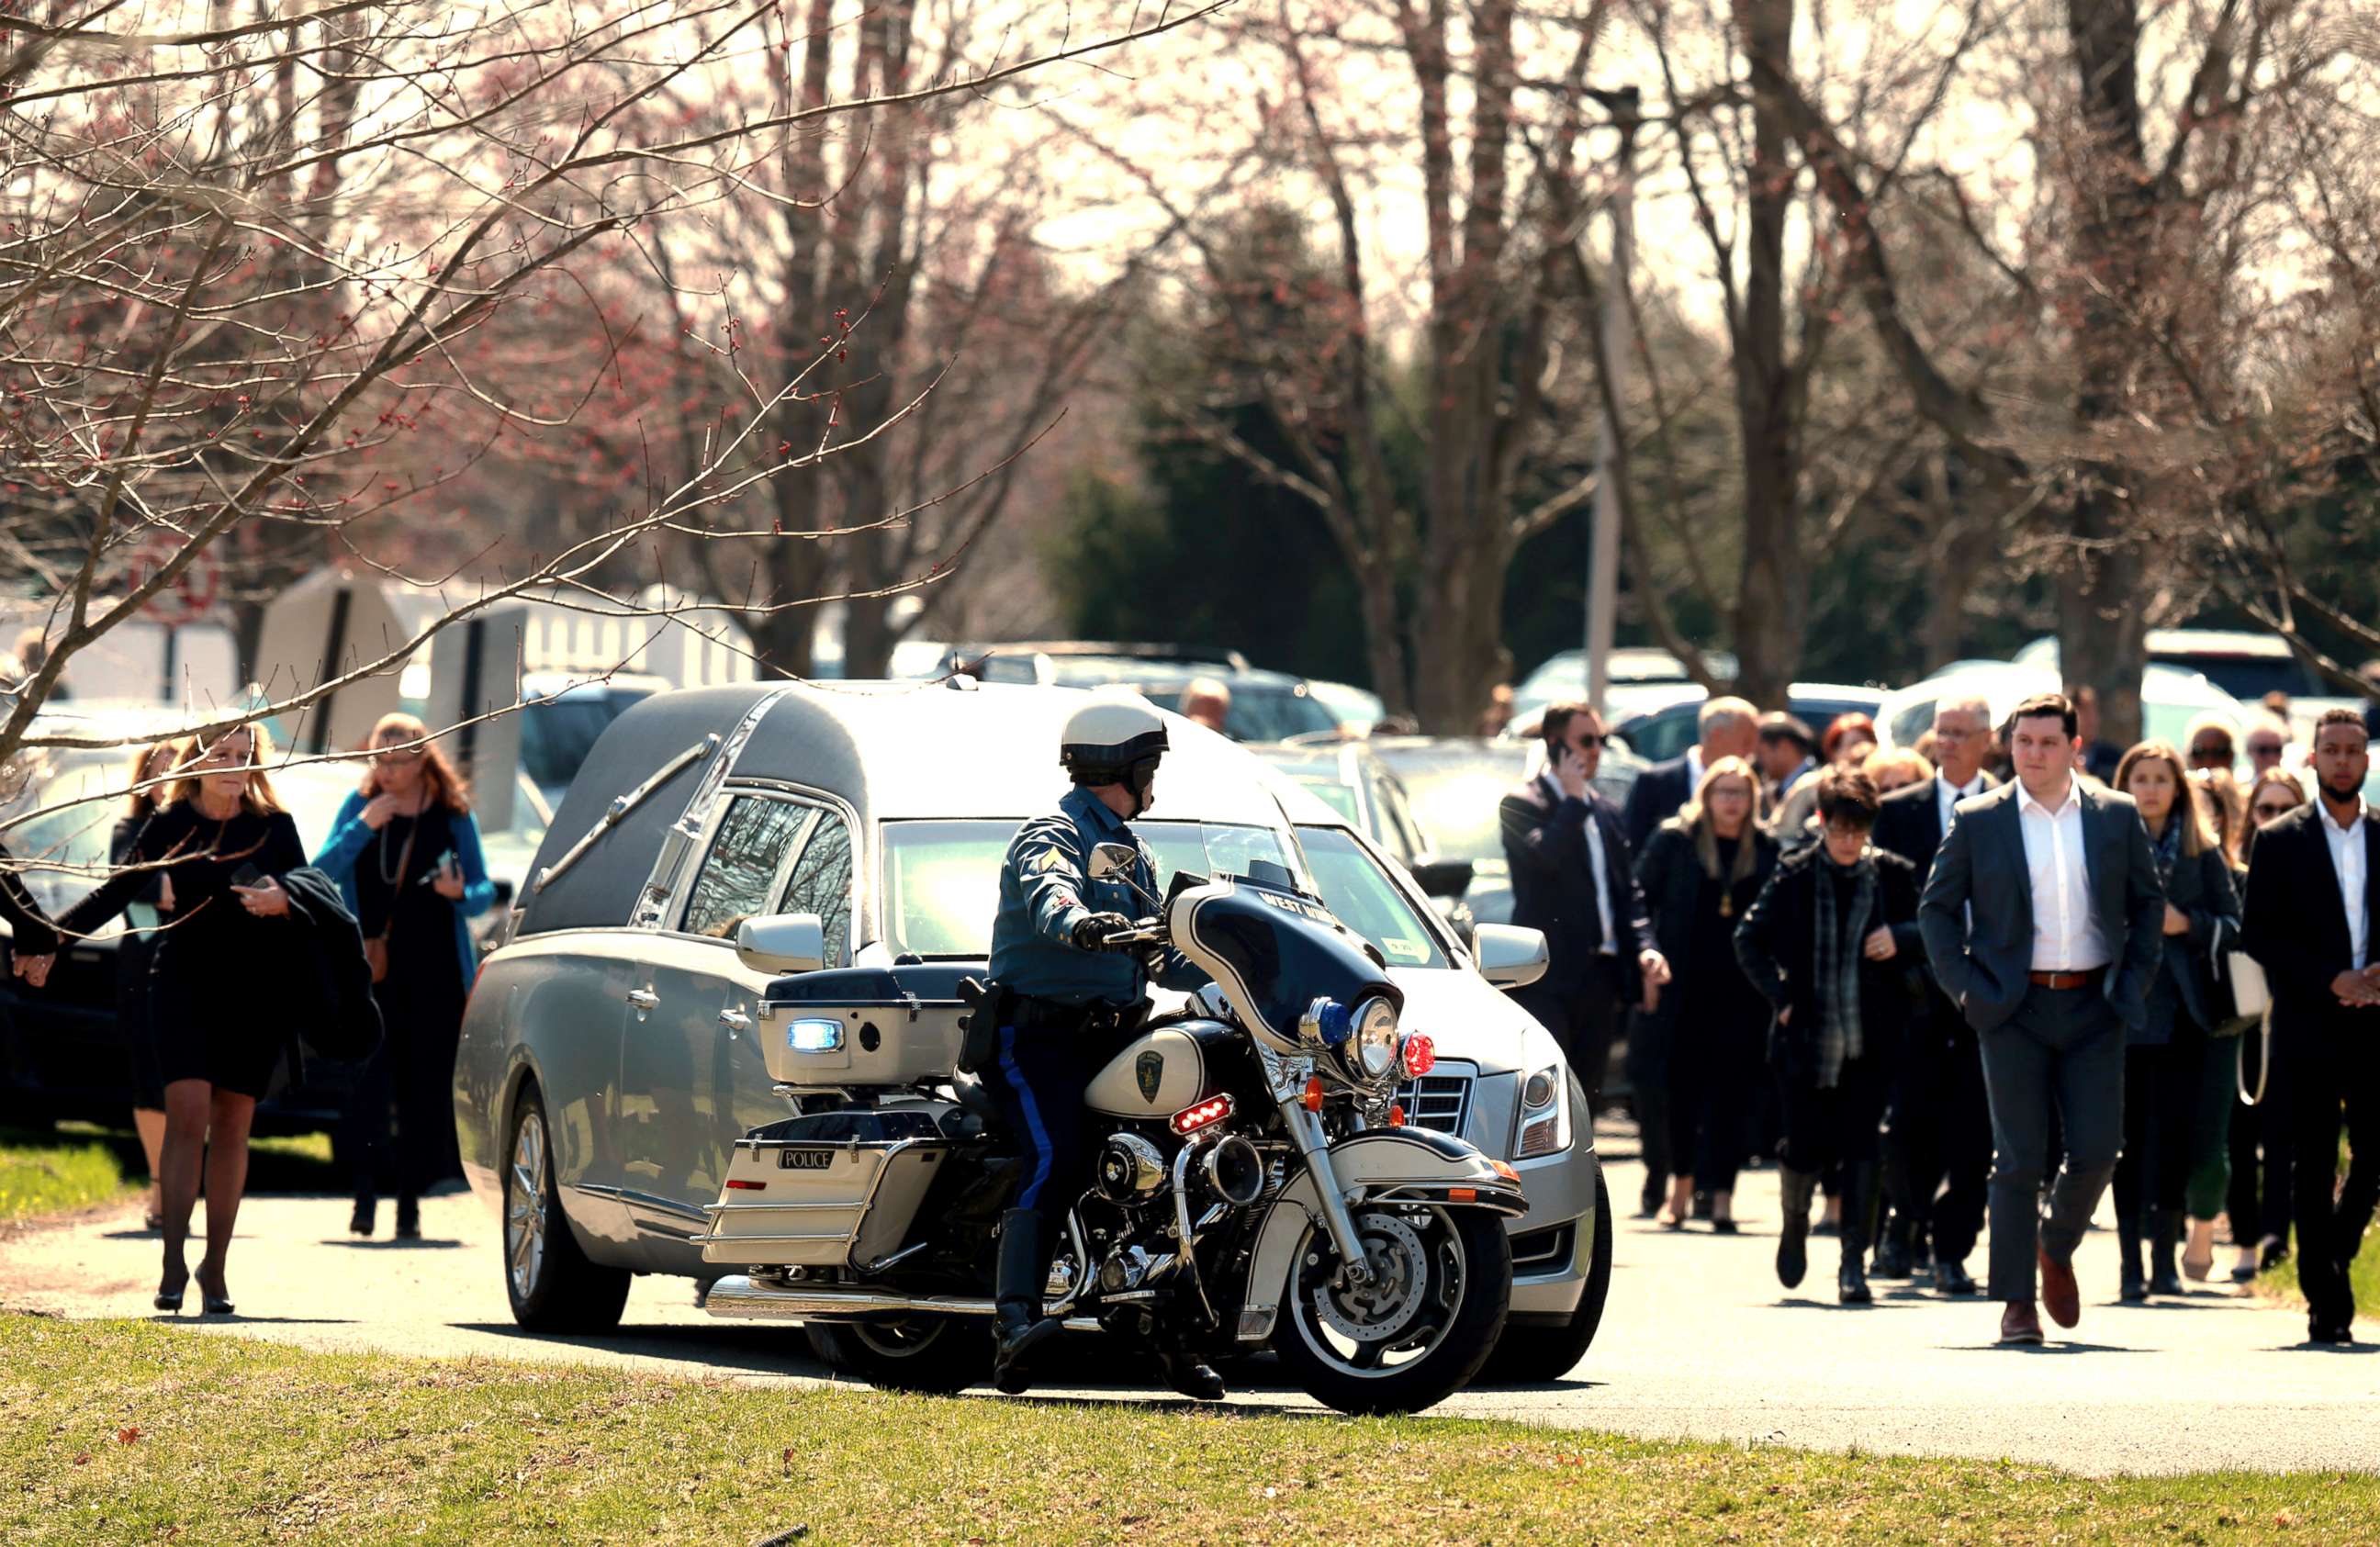 PHOTO: Mourners depart after funeral services for Samantha Josephson at at Congregation Beth Chaim in West Windsor, N.J., on Wednesday, April 3, 2019.